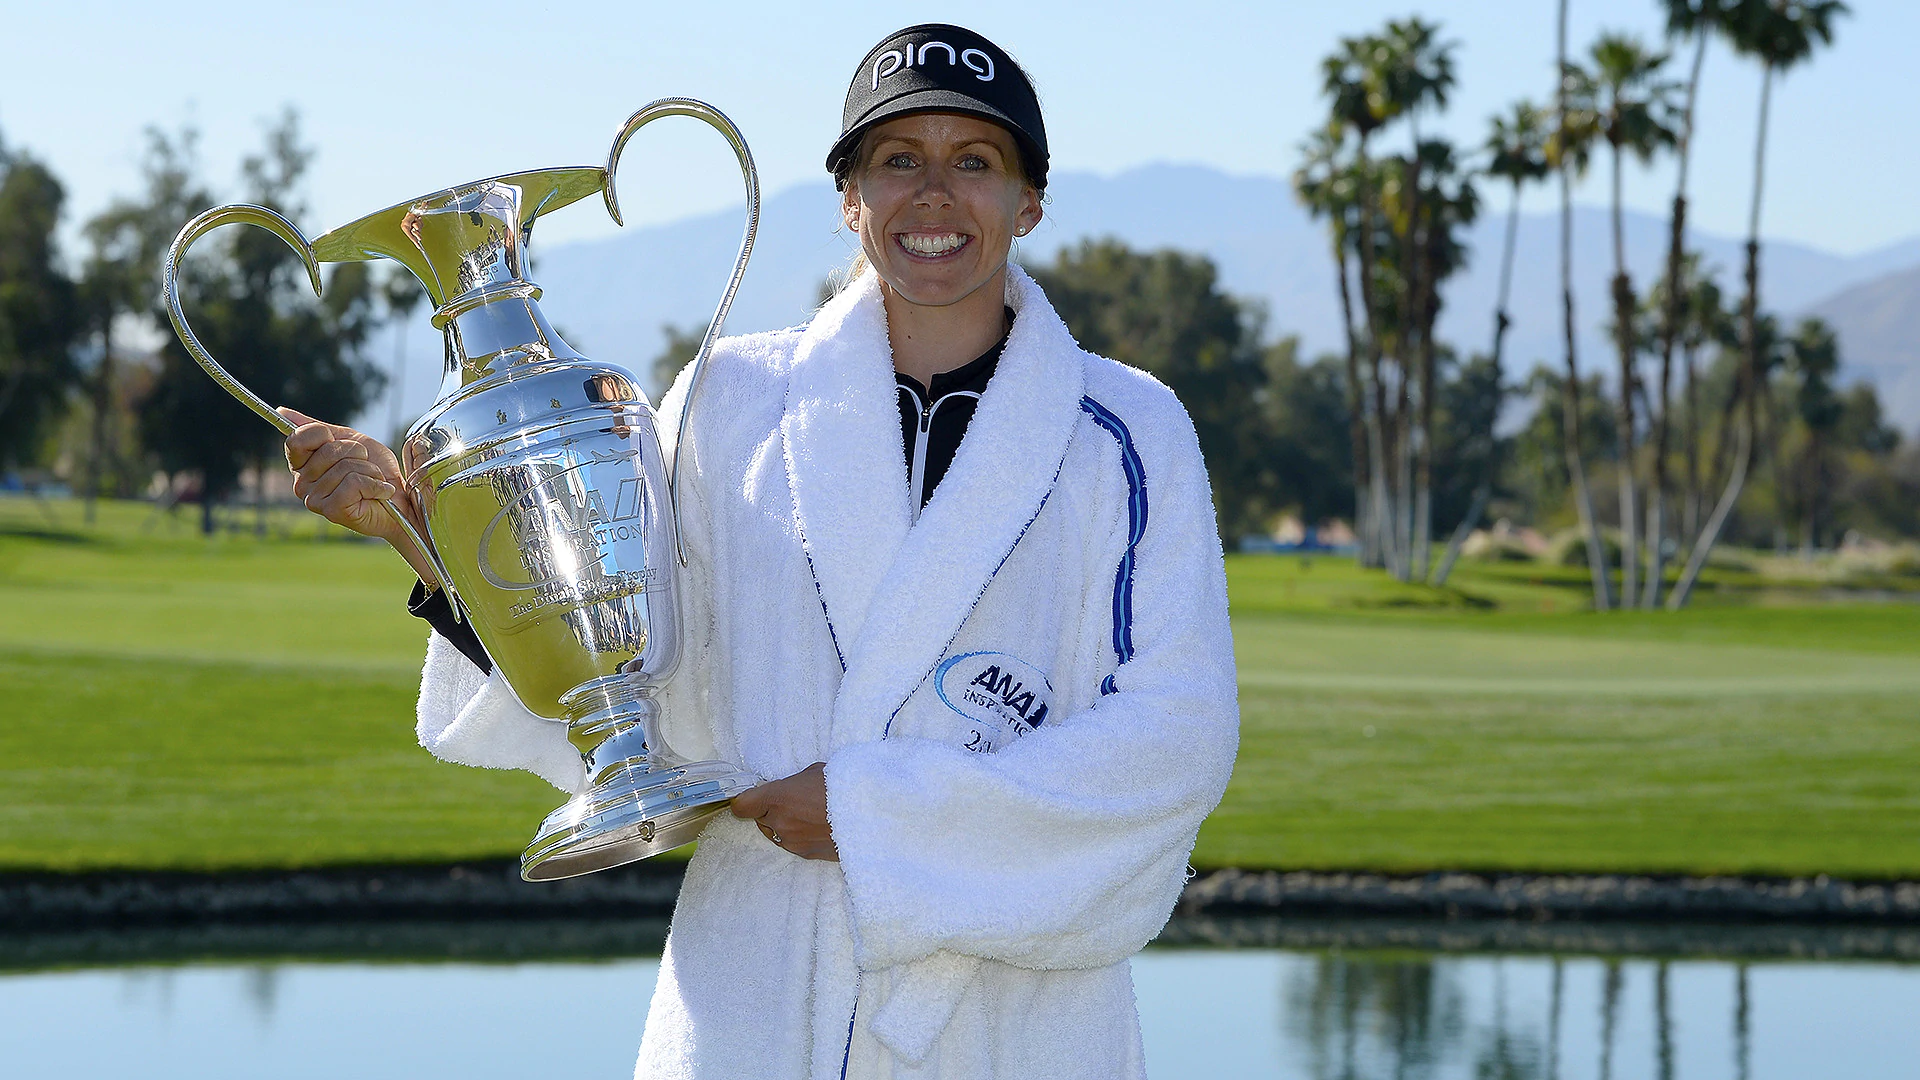 Tournament of Champions a thrill for first-time LPGA winners